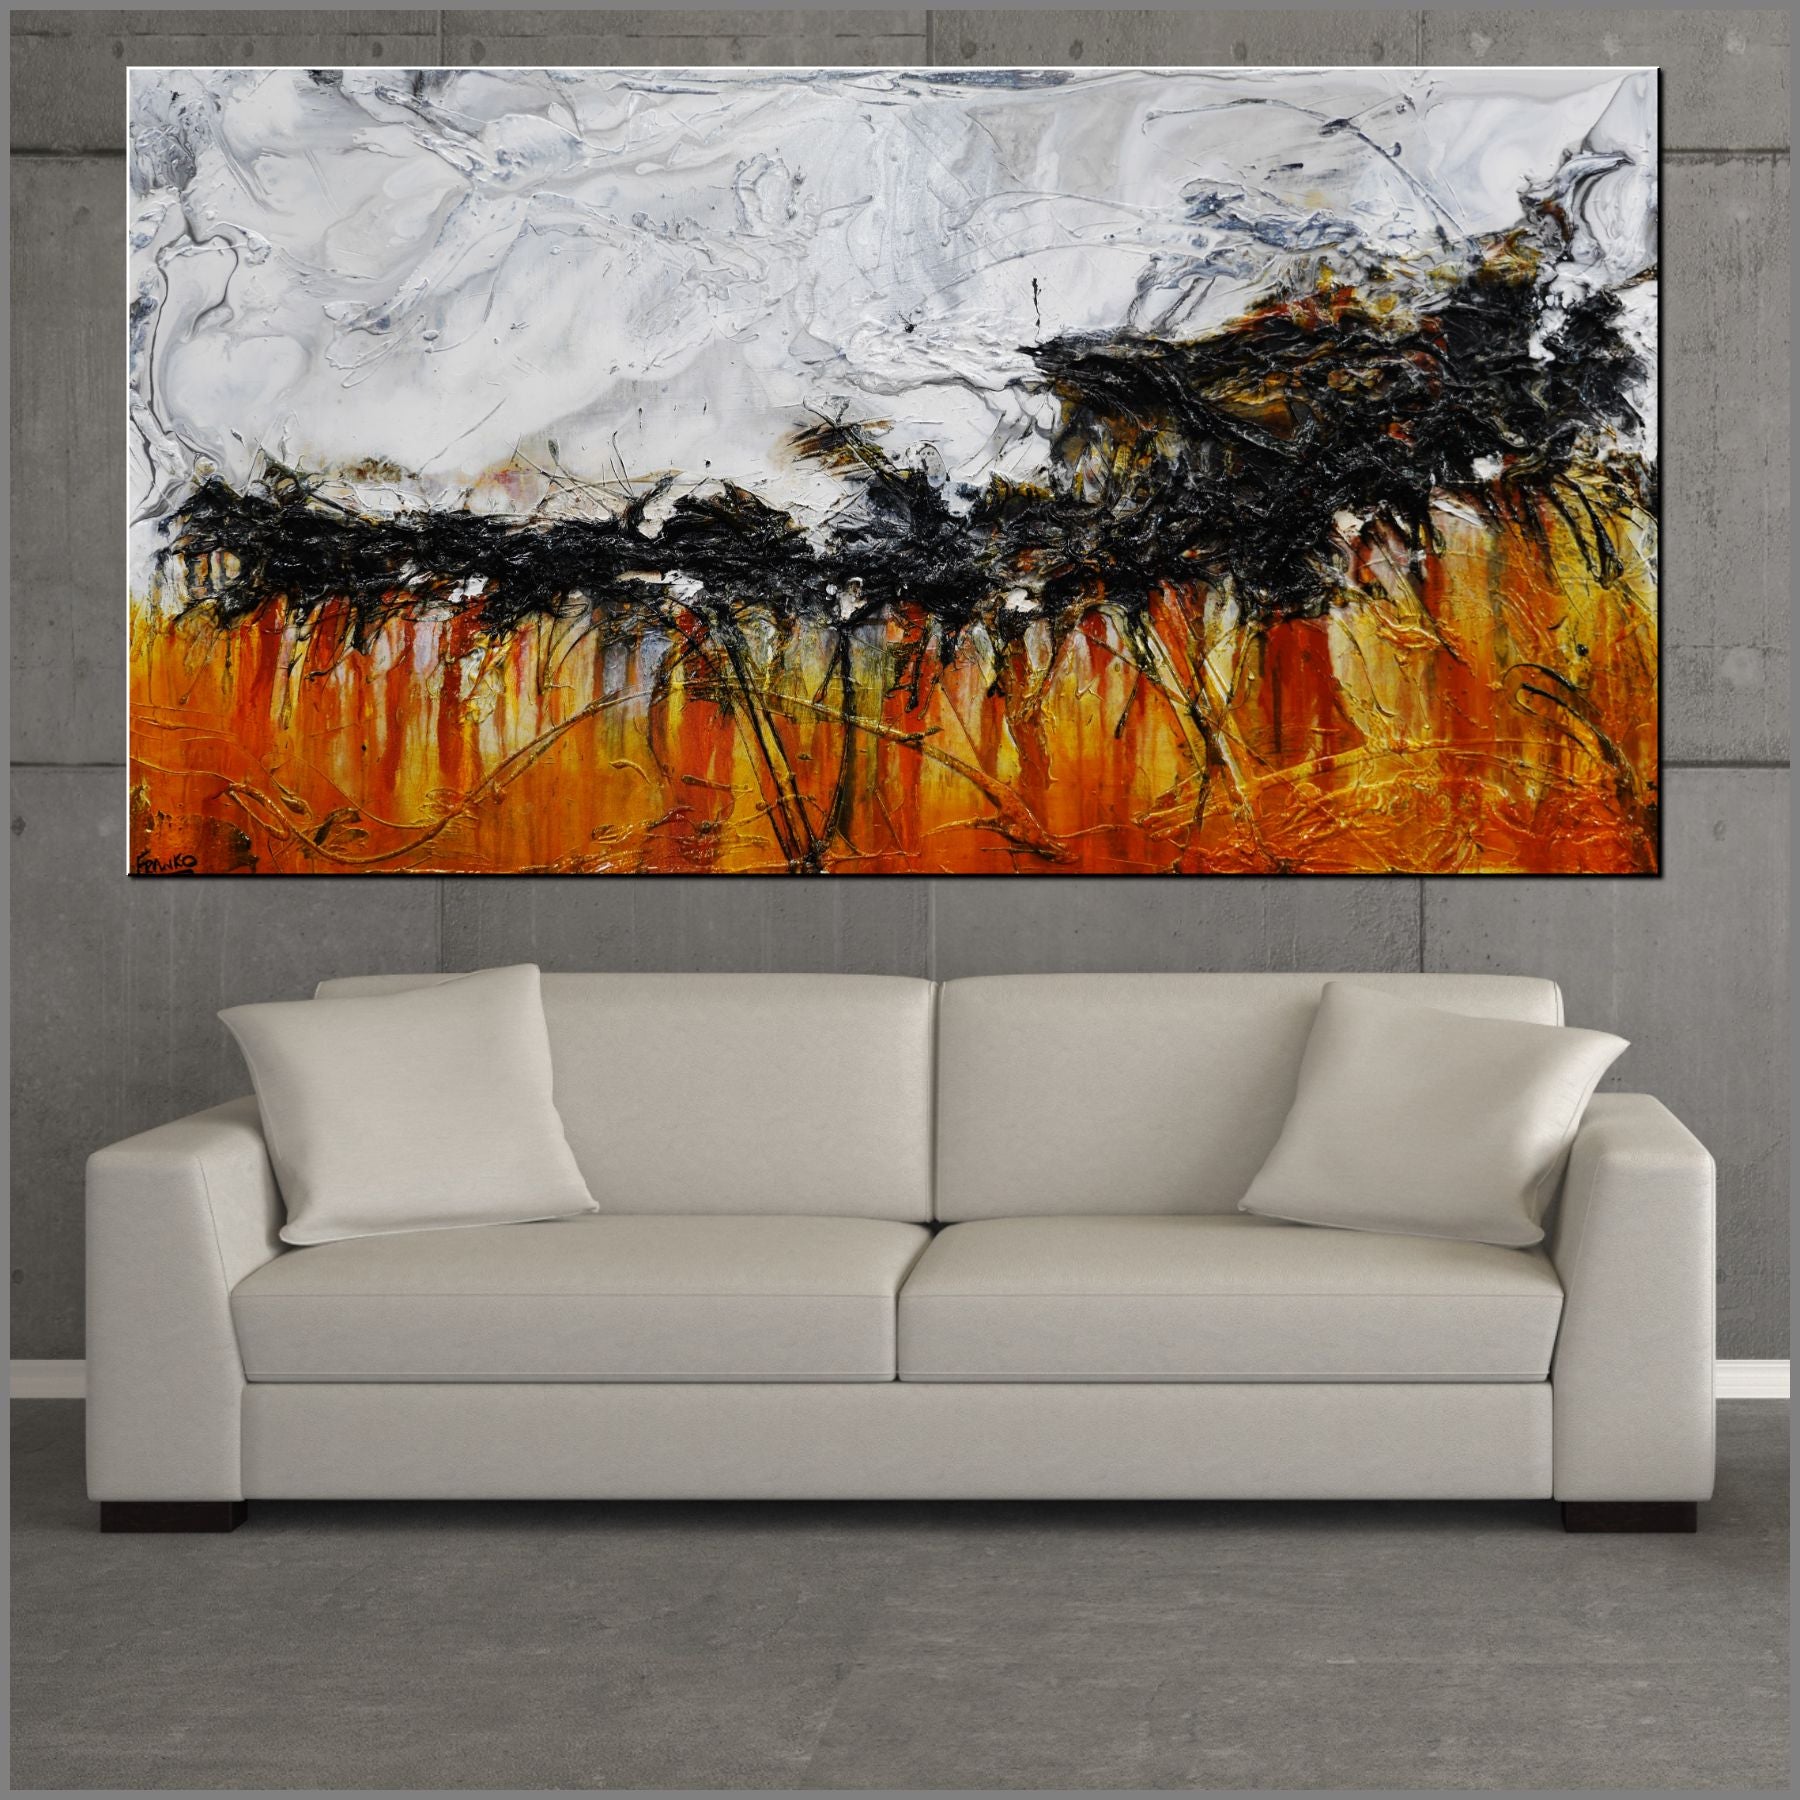 Our Rusted Outback 190cm x 100cm Grey Sienna Textured Abstract Painting-Abstract-huge-commission-Art-Franko-Artist-Australian-Franklin Art Studio-gallery